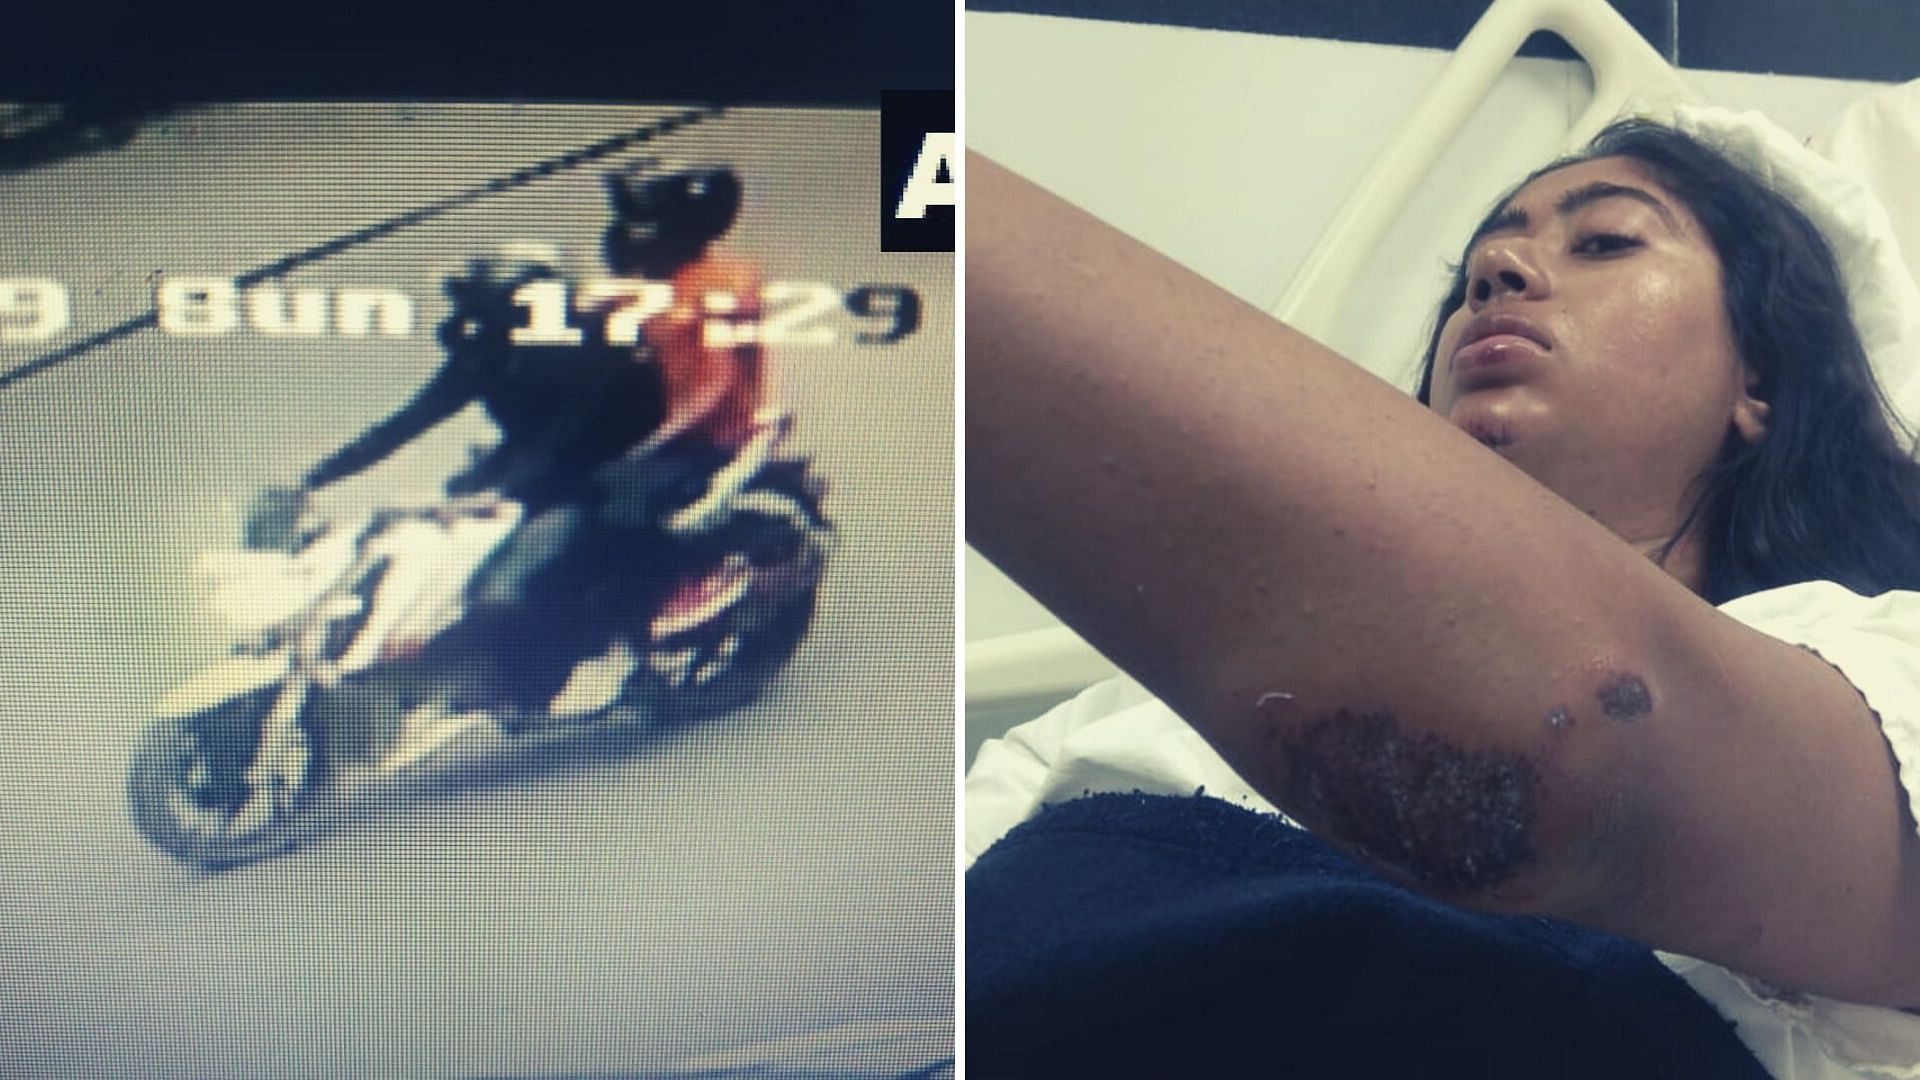 The journalist (right) and the bike borne assailants caught on camera (left).